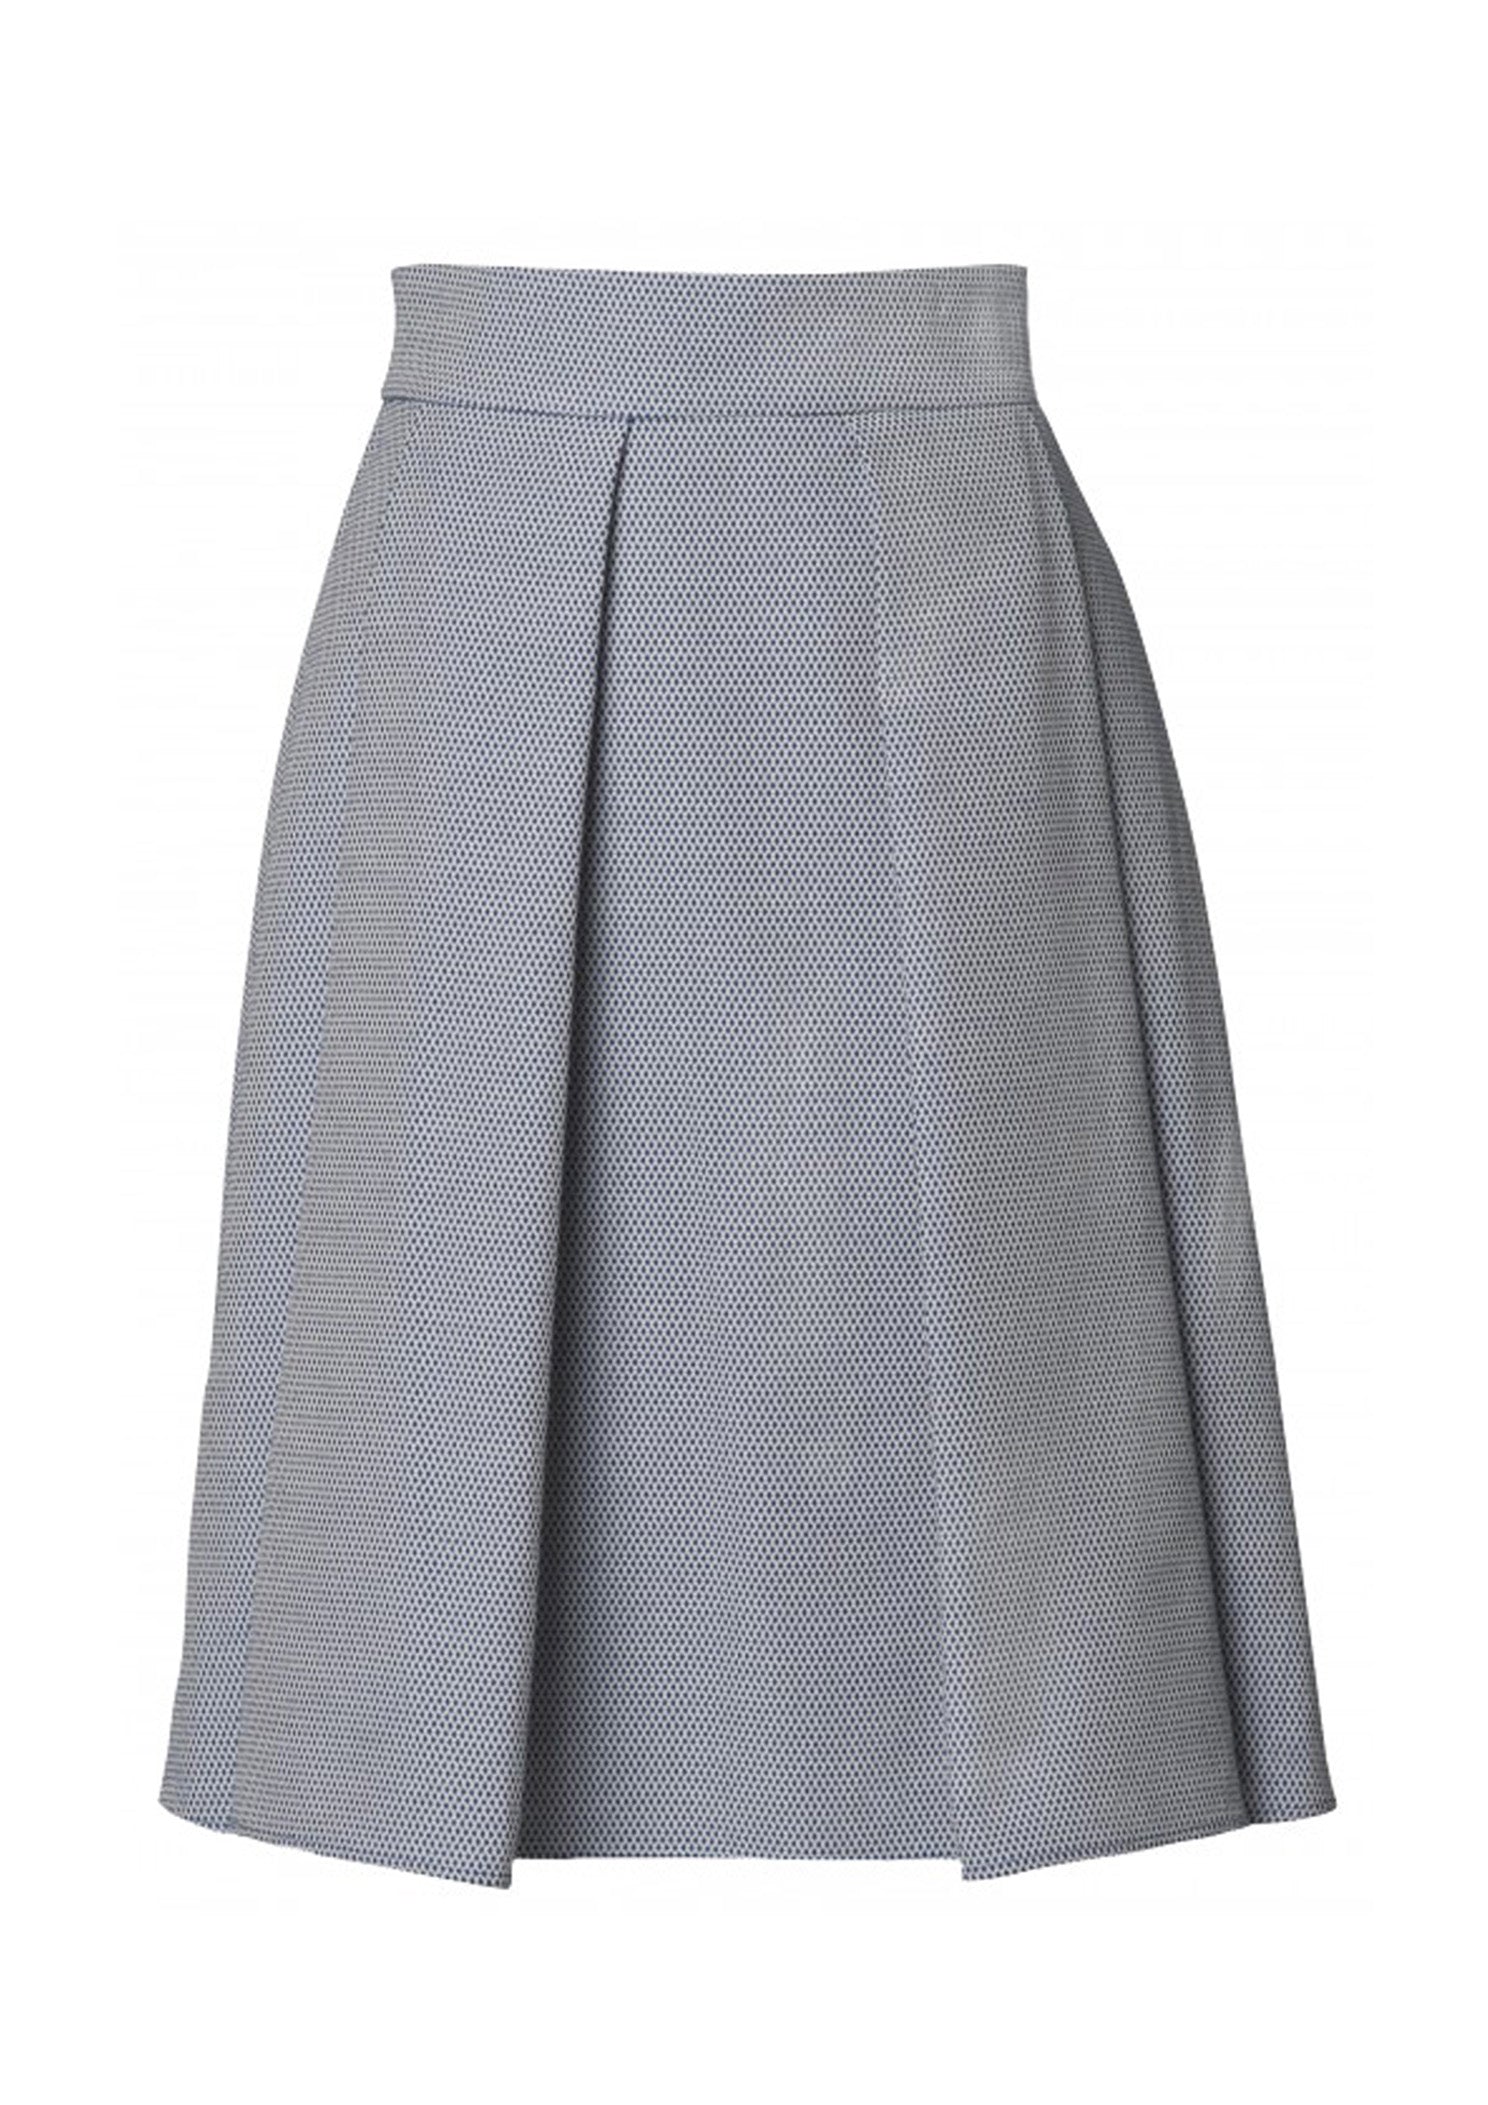 Two Pleat skirt